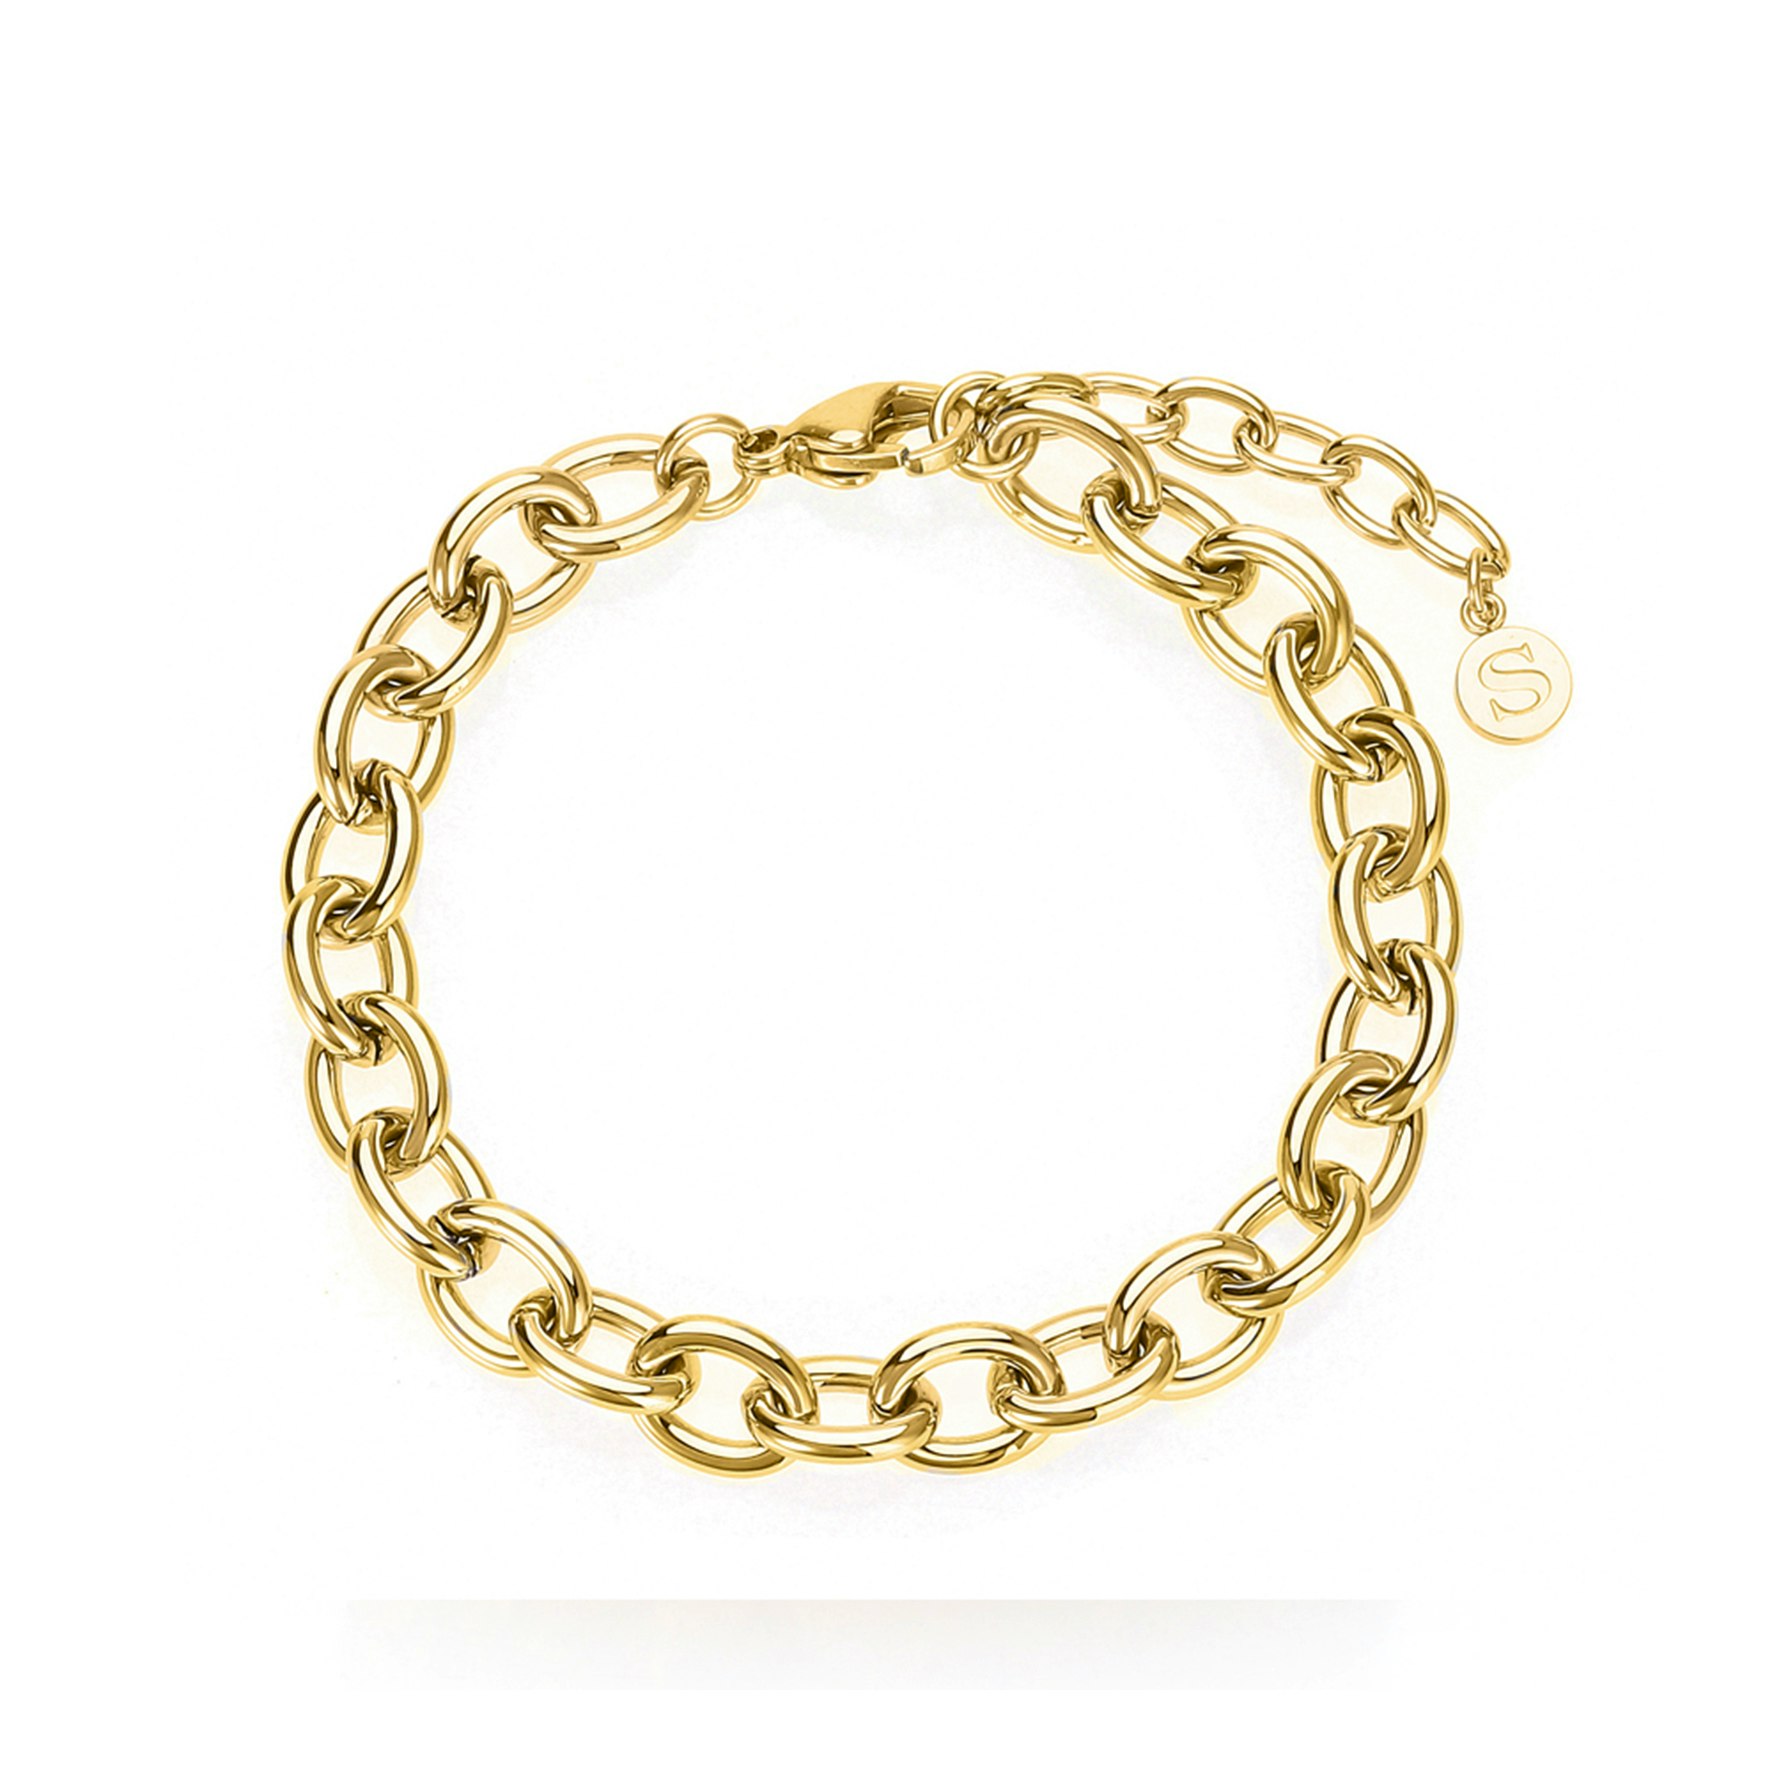 Clara Bracelet from Sistie 2nd in Goldplated stainless steel